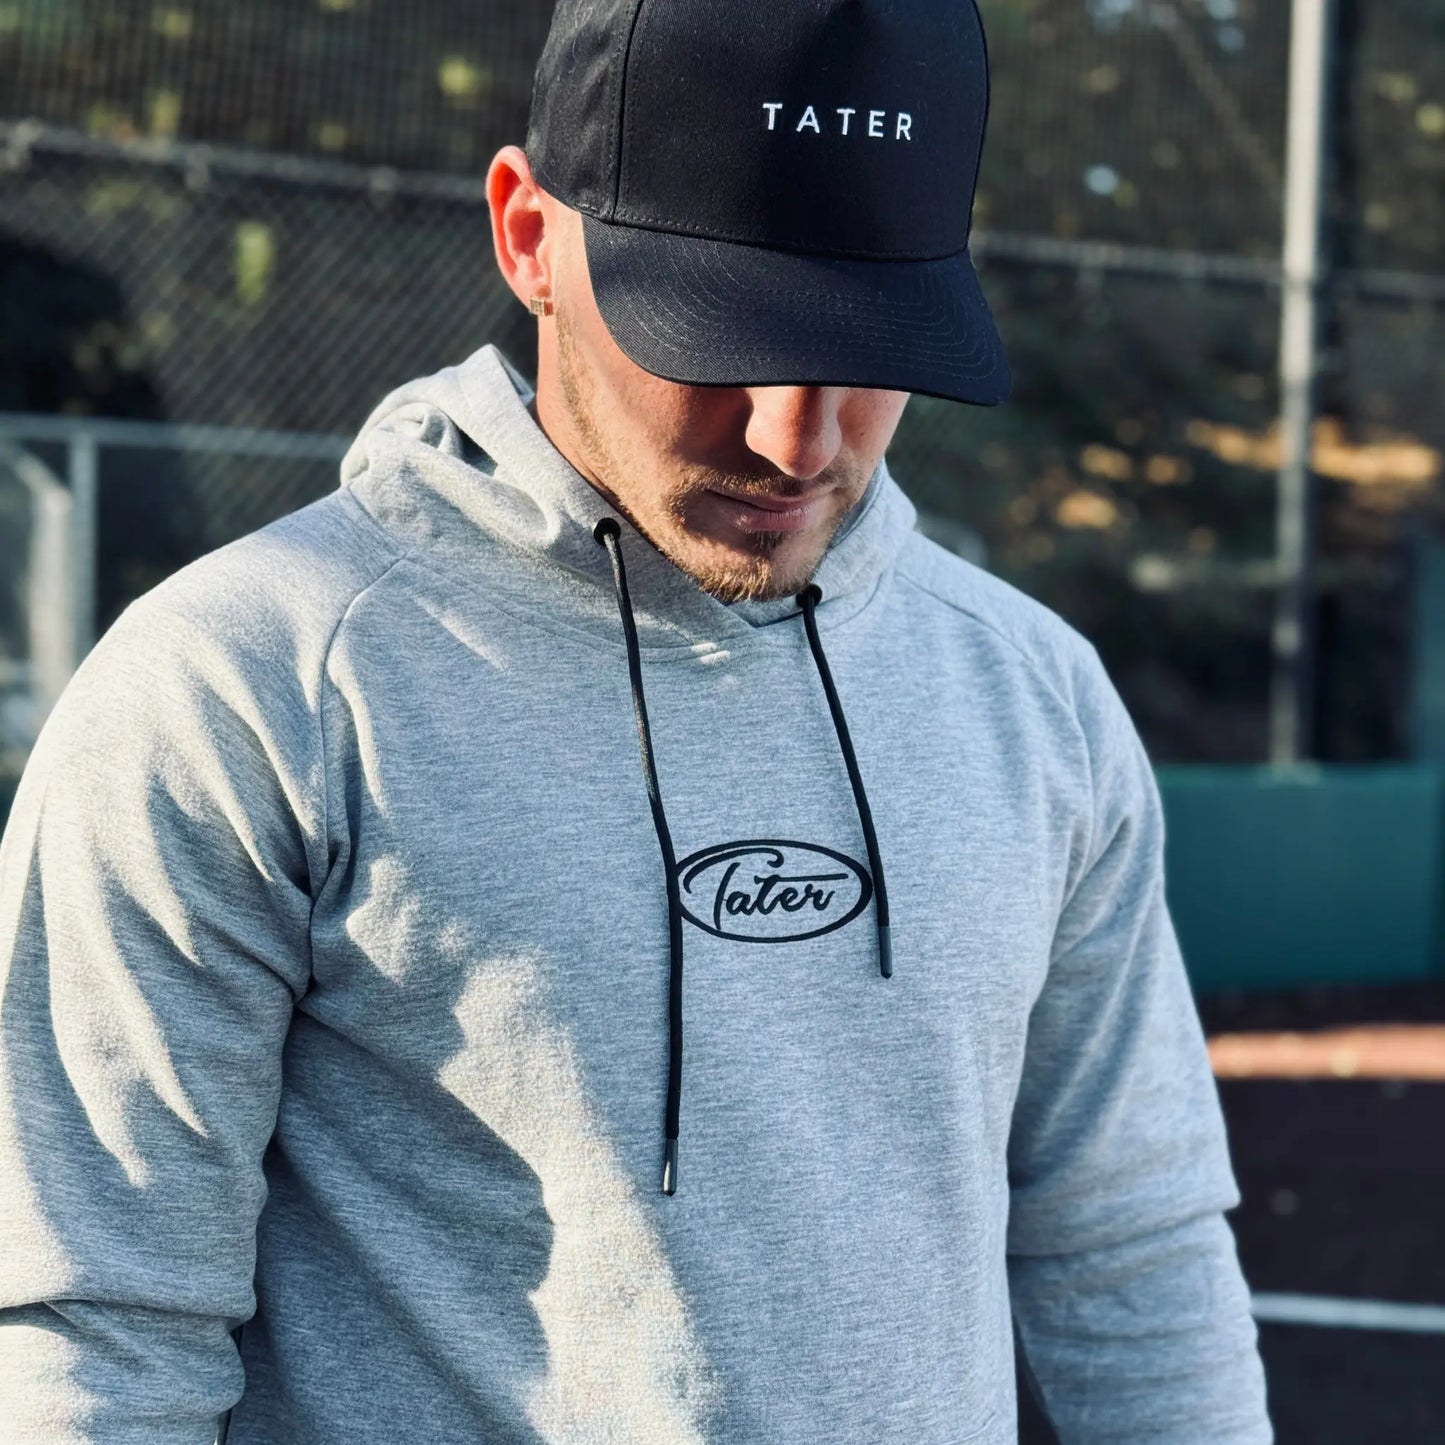 Focused athlete in Tater Baseball gear, wearing a casual grey hoodie with the Tater logo and a sleek black Tater cap, ready for a workout or practice session on the field.